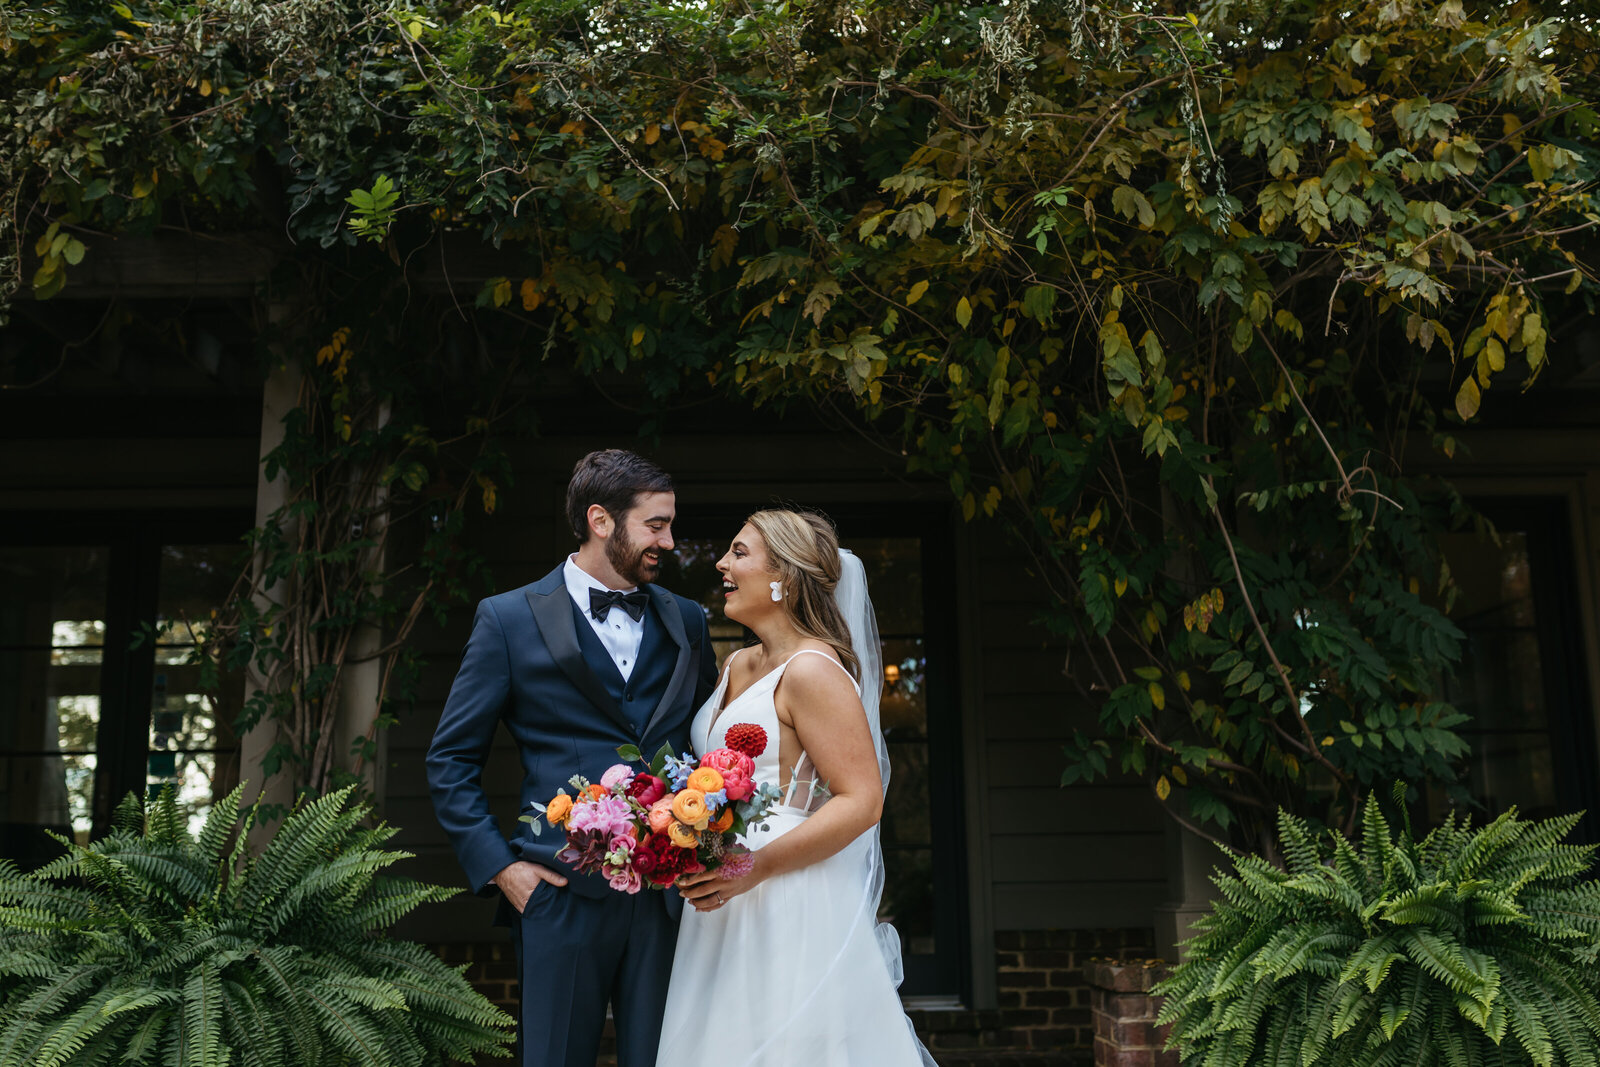 A bride and groom smile at each other under a canopy of leaves